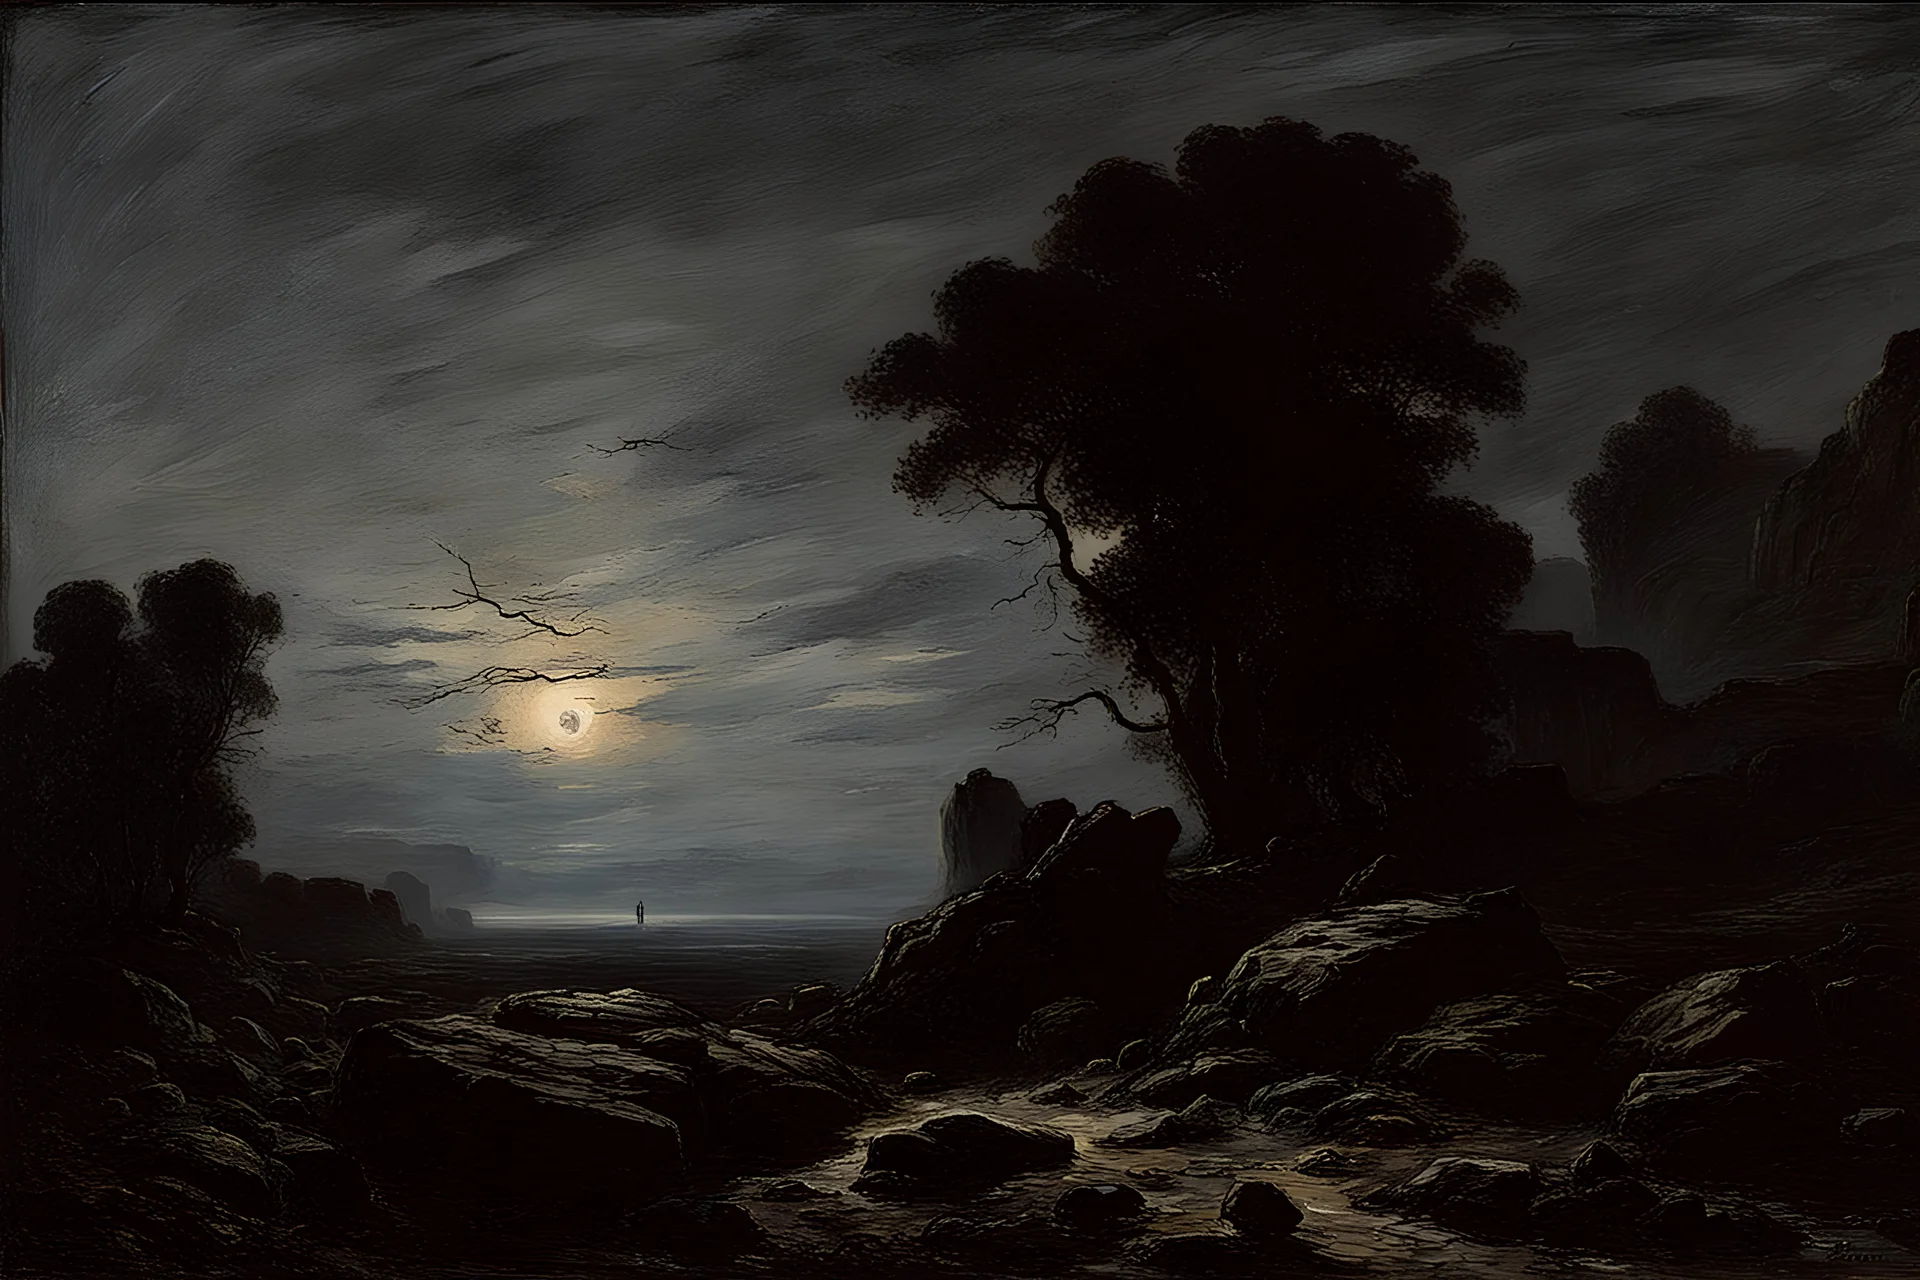 Night, rocks, trees, begginer's landscape, horror gothic movies influence, friedrich eckenfelder and willem maris impressionism paintings